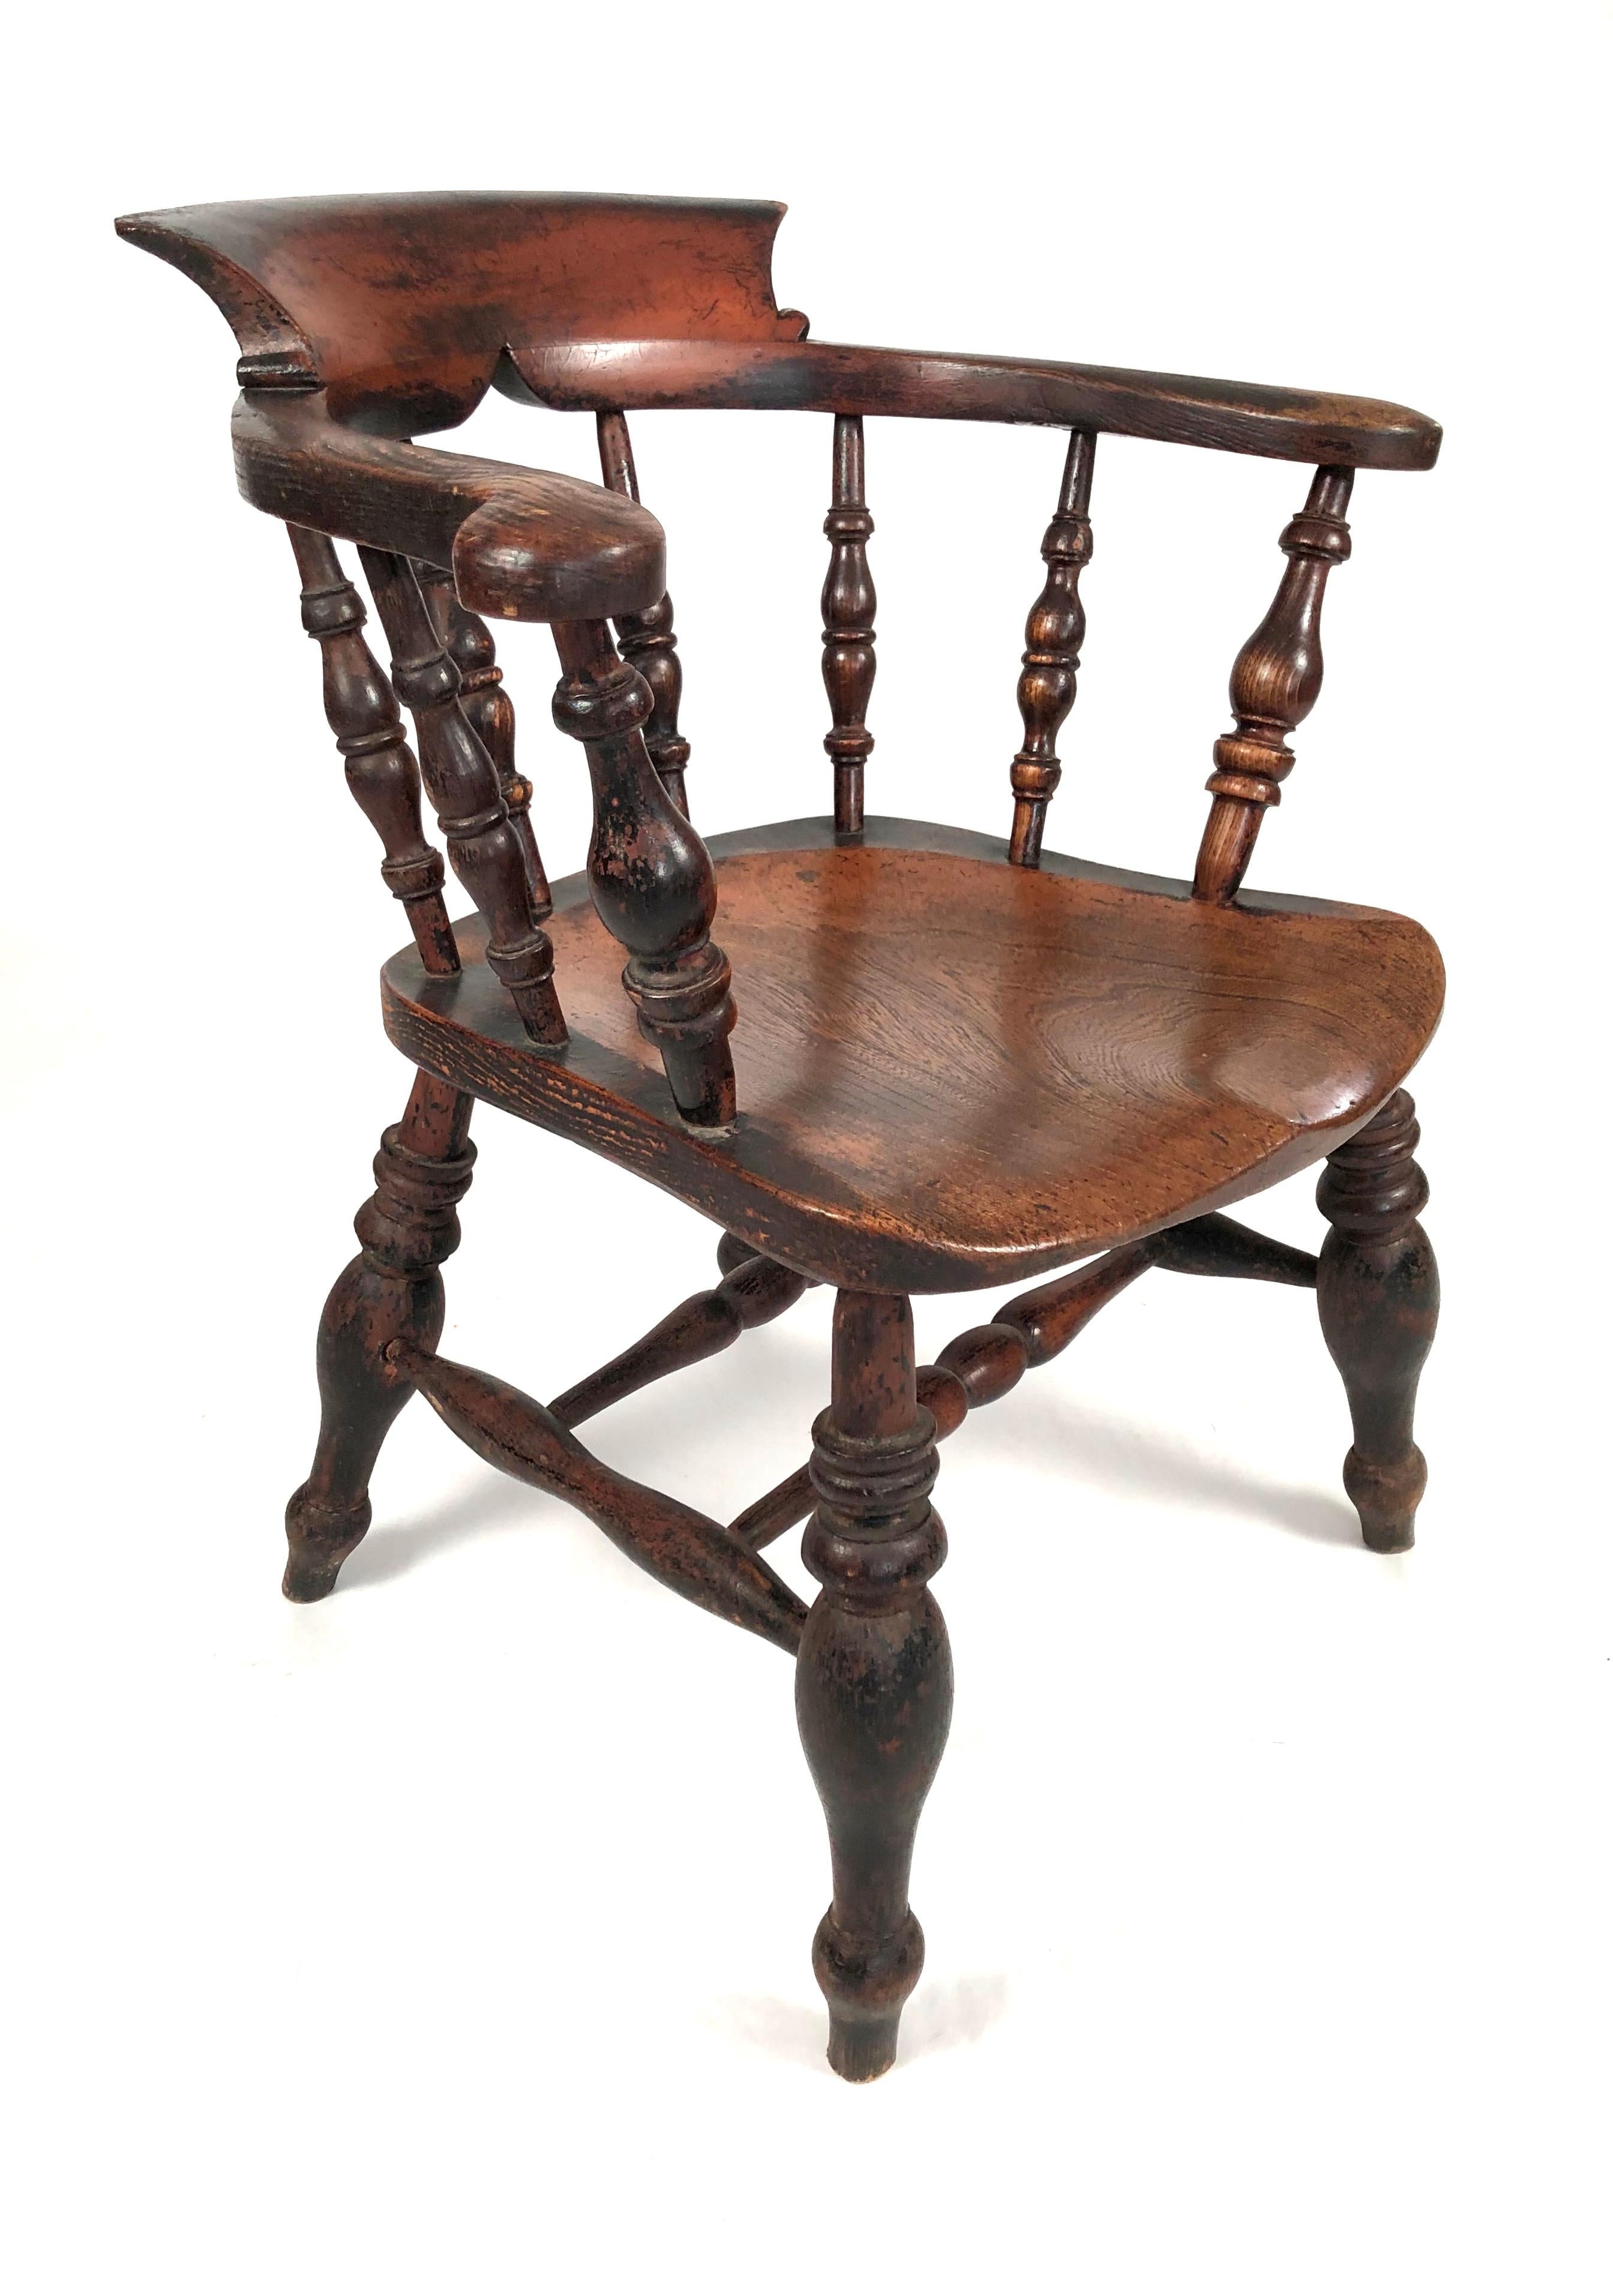 A wonderfully bold 19th century English Country captain's chair in oak with curved back, scrolled arms, a shaped seat and turned spindle back supports, legs and stretchers. Wonderful patina and character as well as being roomy and comfortable.